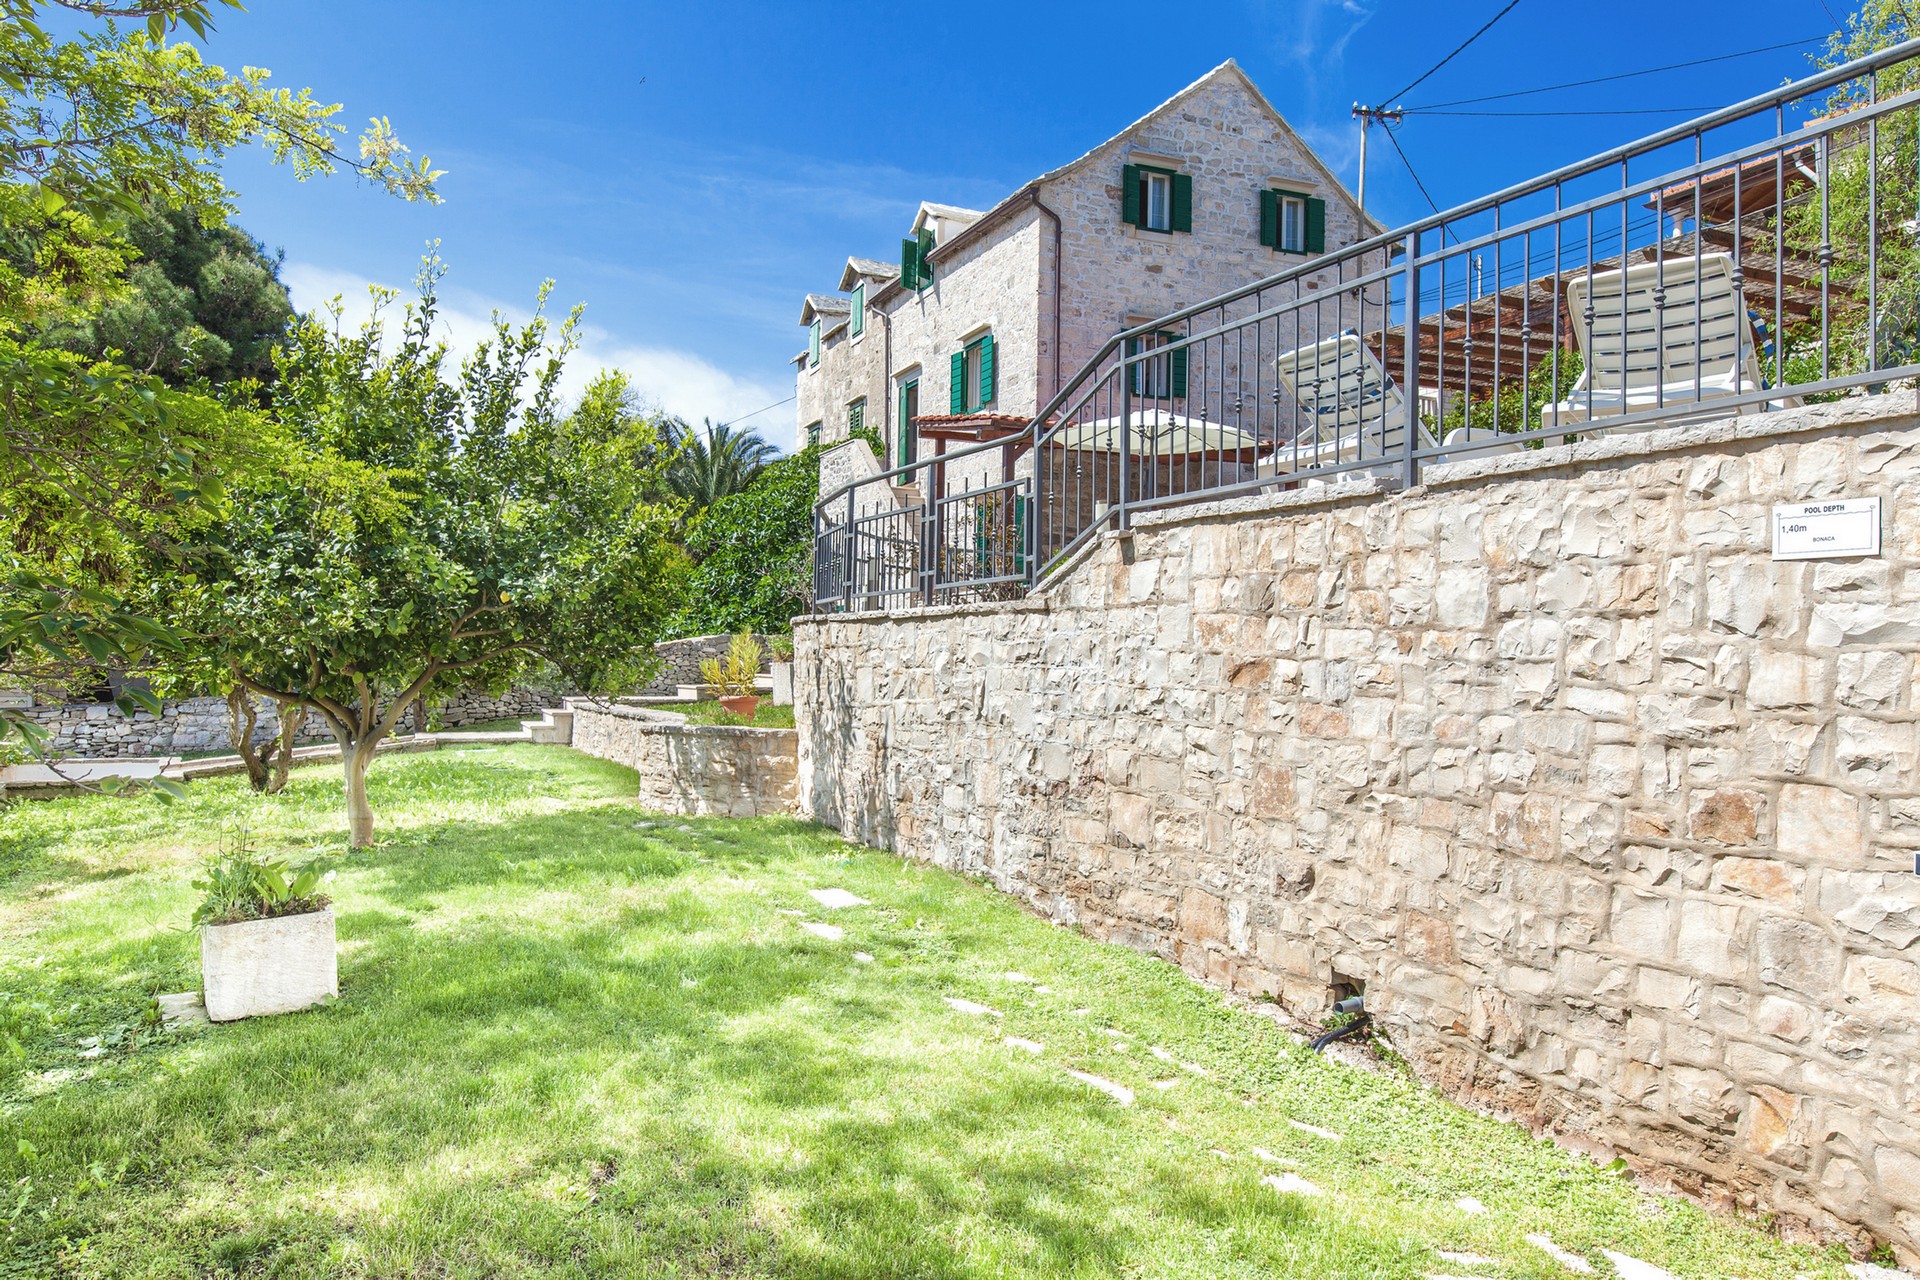 Private garden and olive grove in front of the Villa Bonaca on the island of Brac